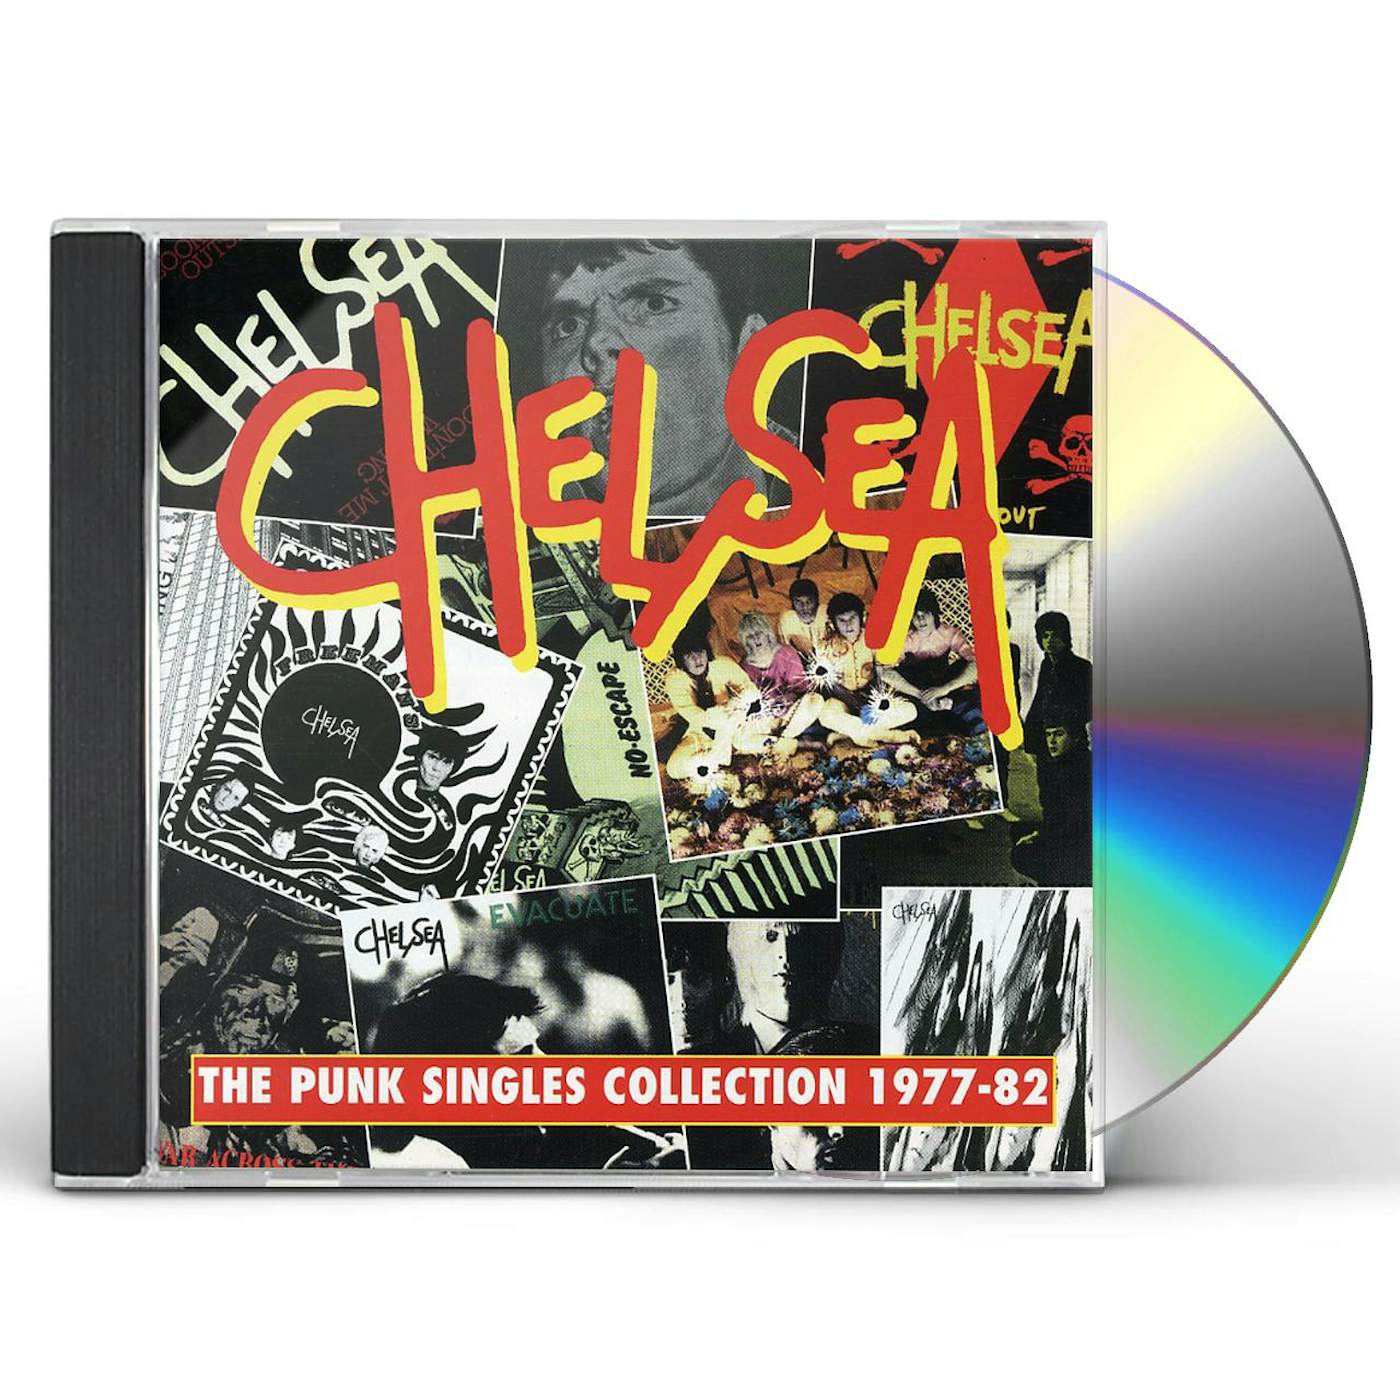 Chelsea PUNK SINGLES COLLECTION 1977-82 CD